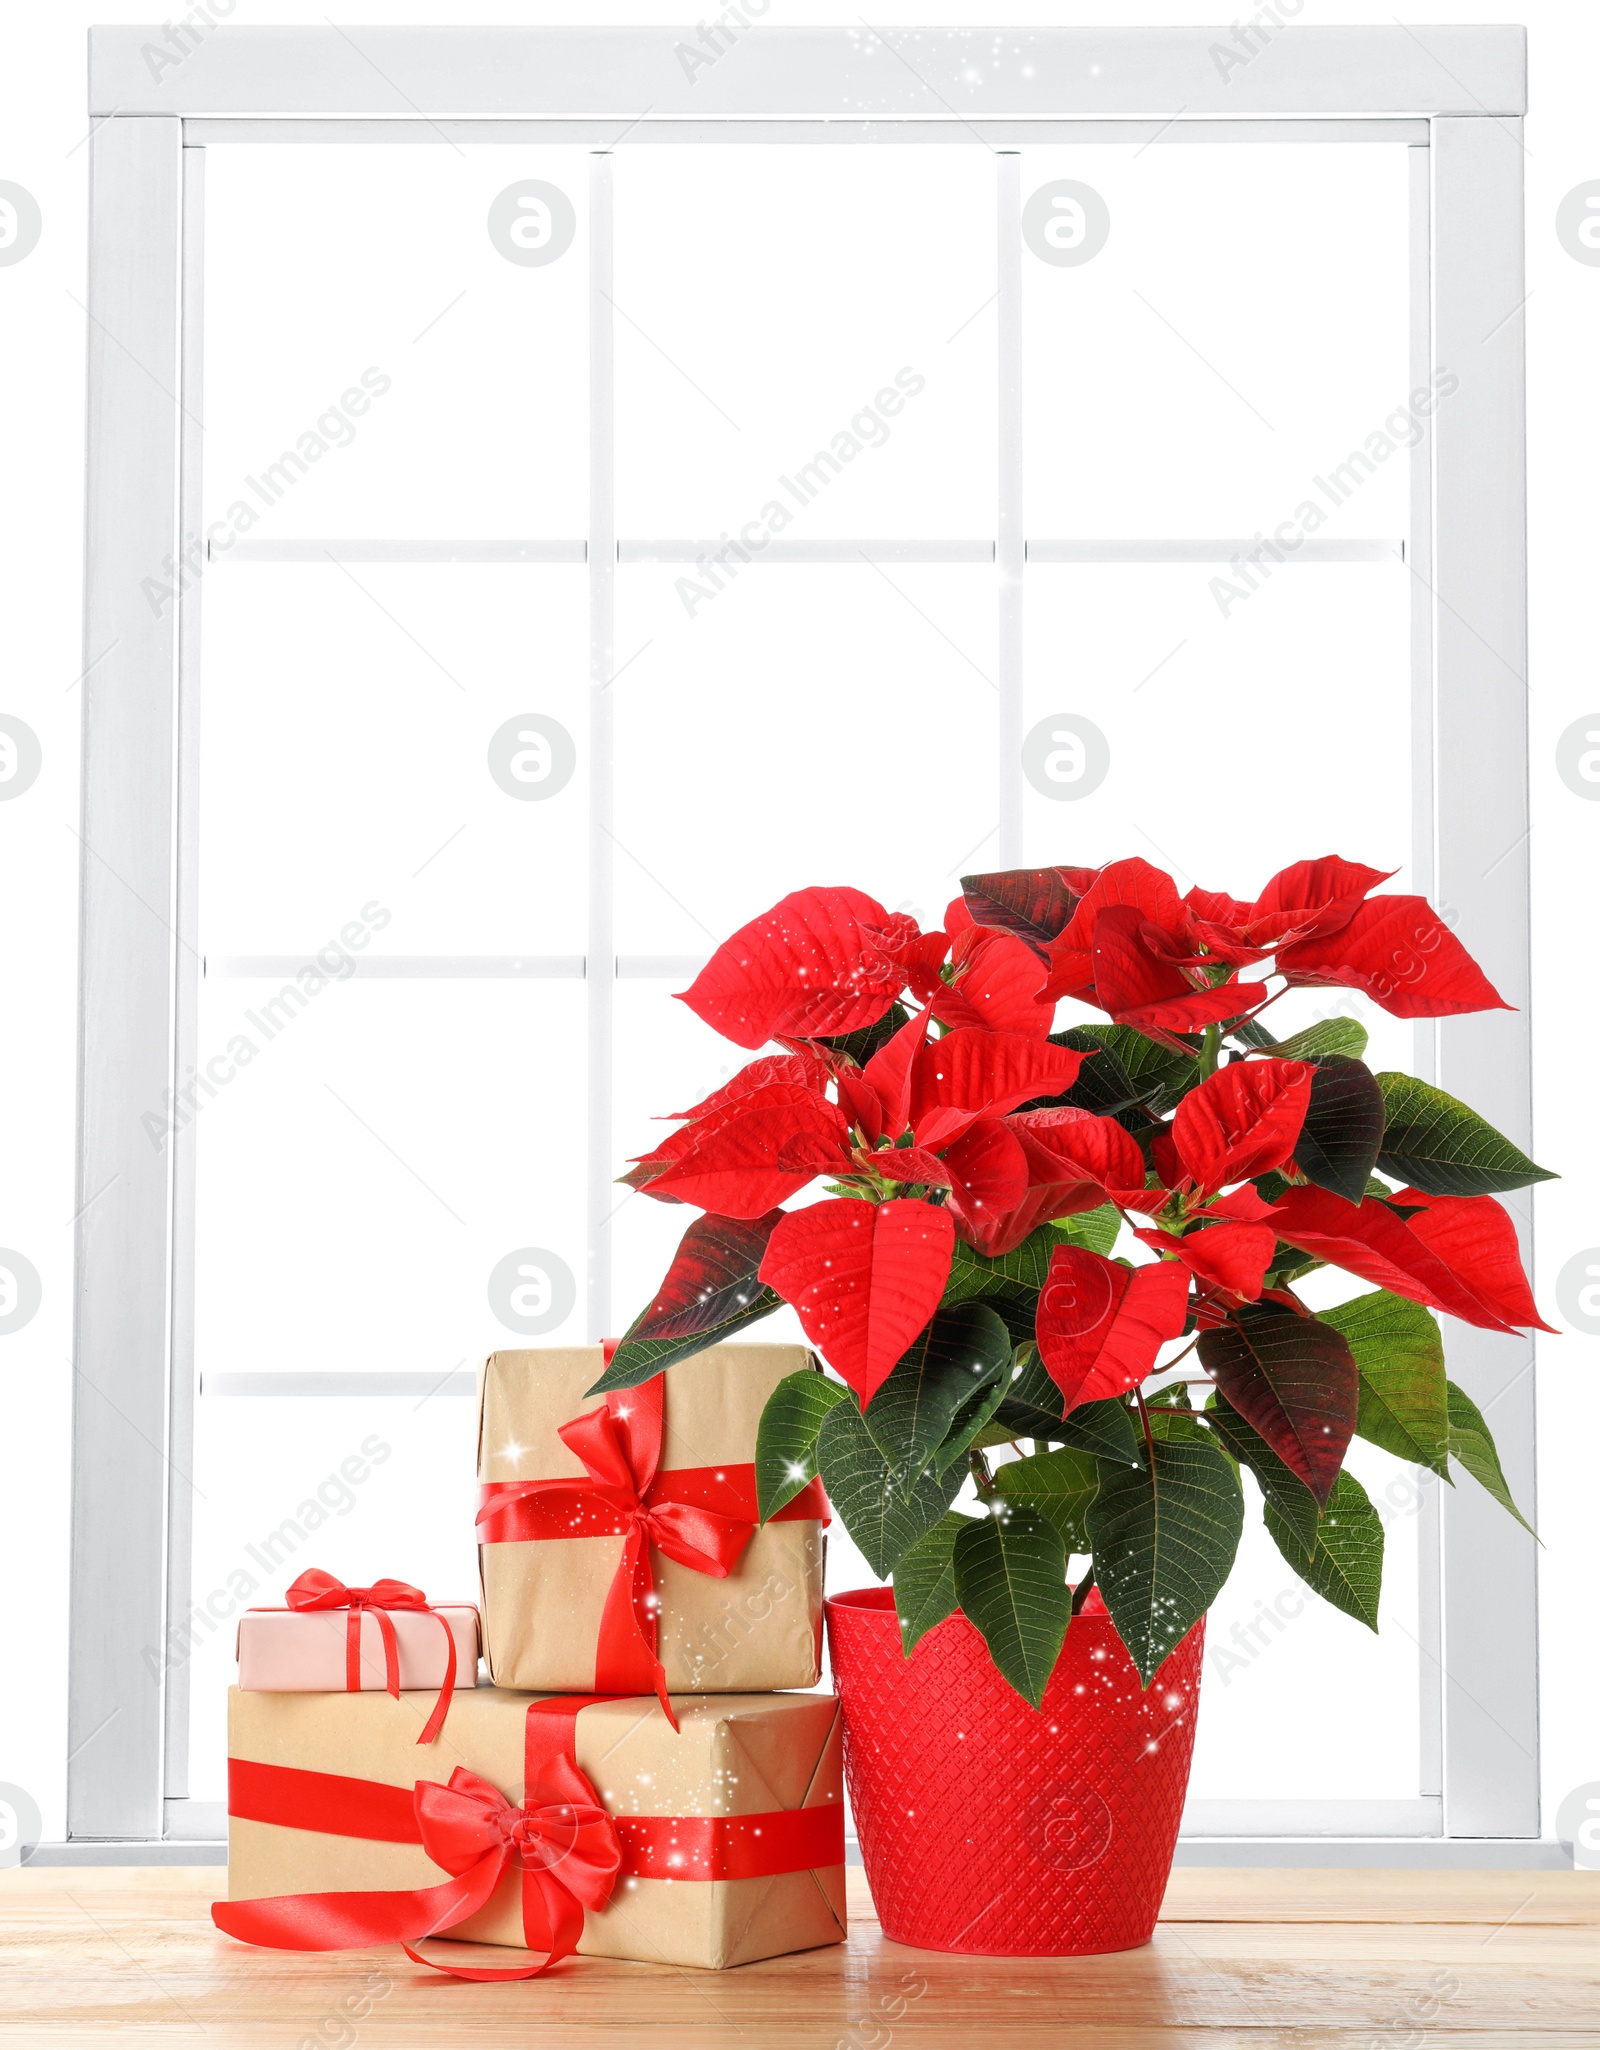 Image of Christmas traditional poinsettia flower in pot and gift boxes on table near window